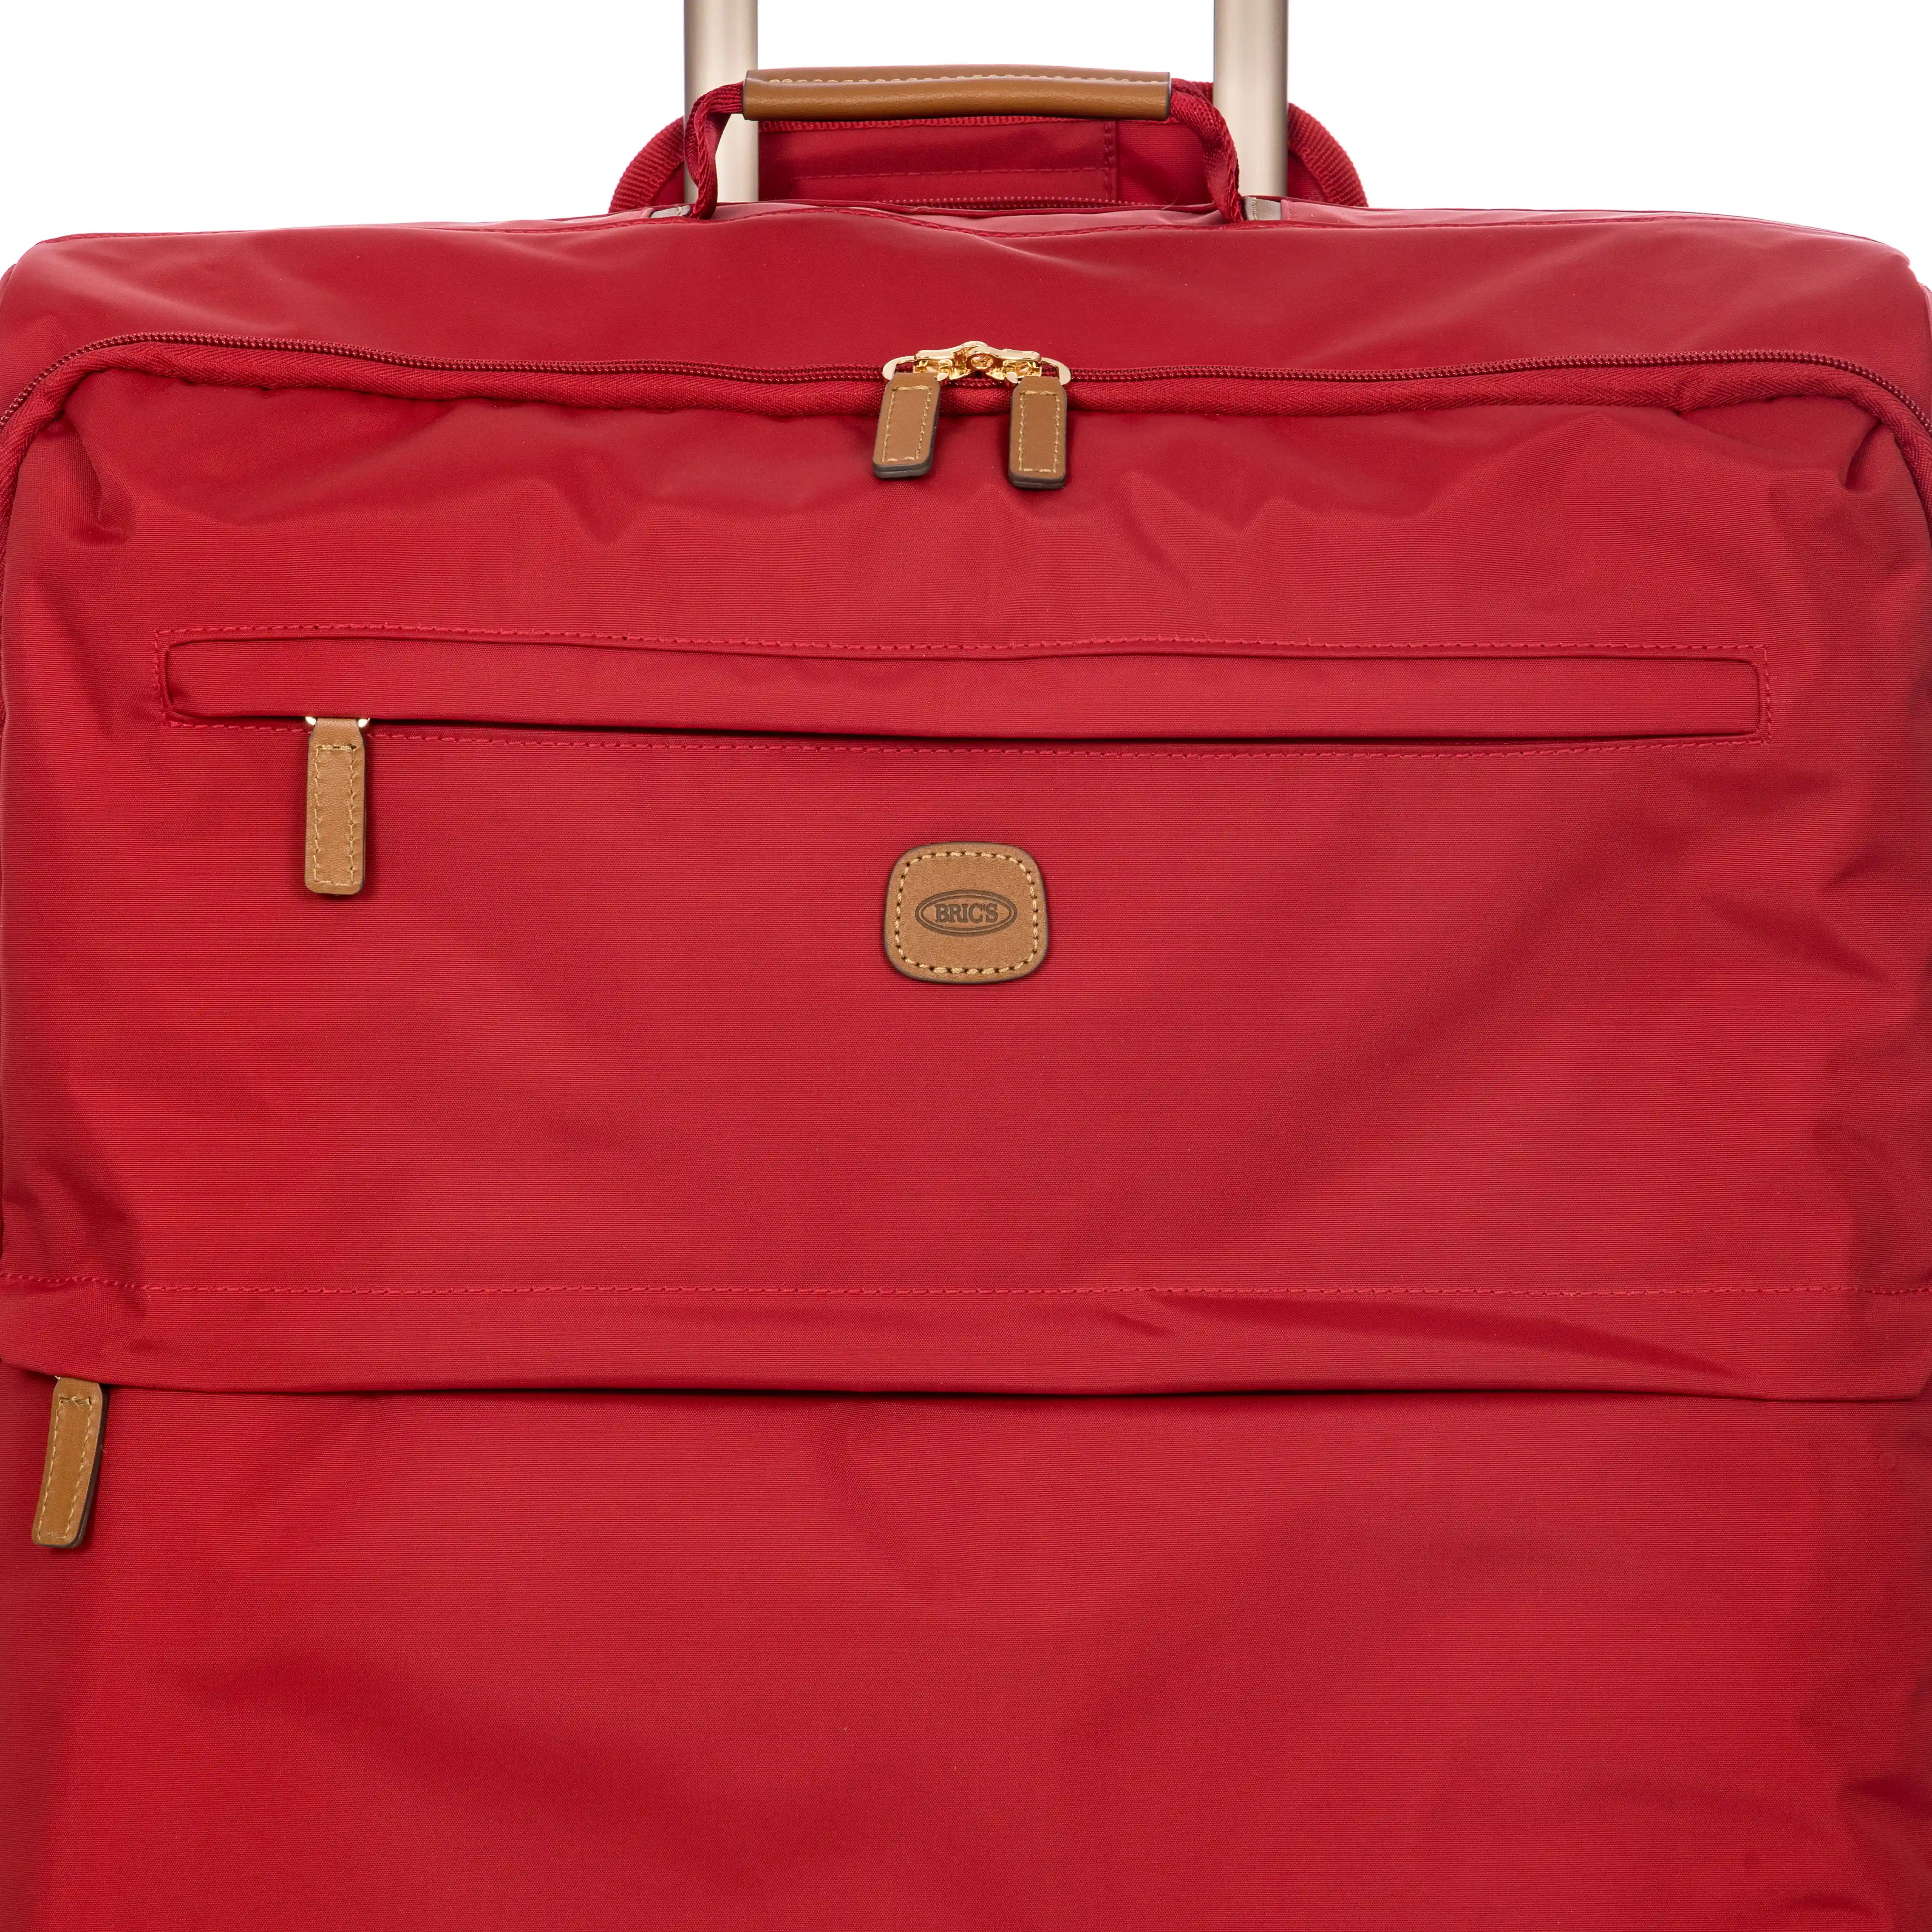 Brics X-Collection 4-Rollen Trolley 77 cm - Red